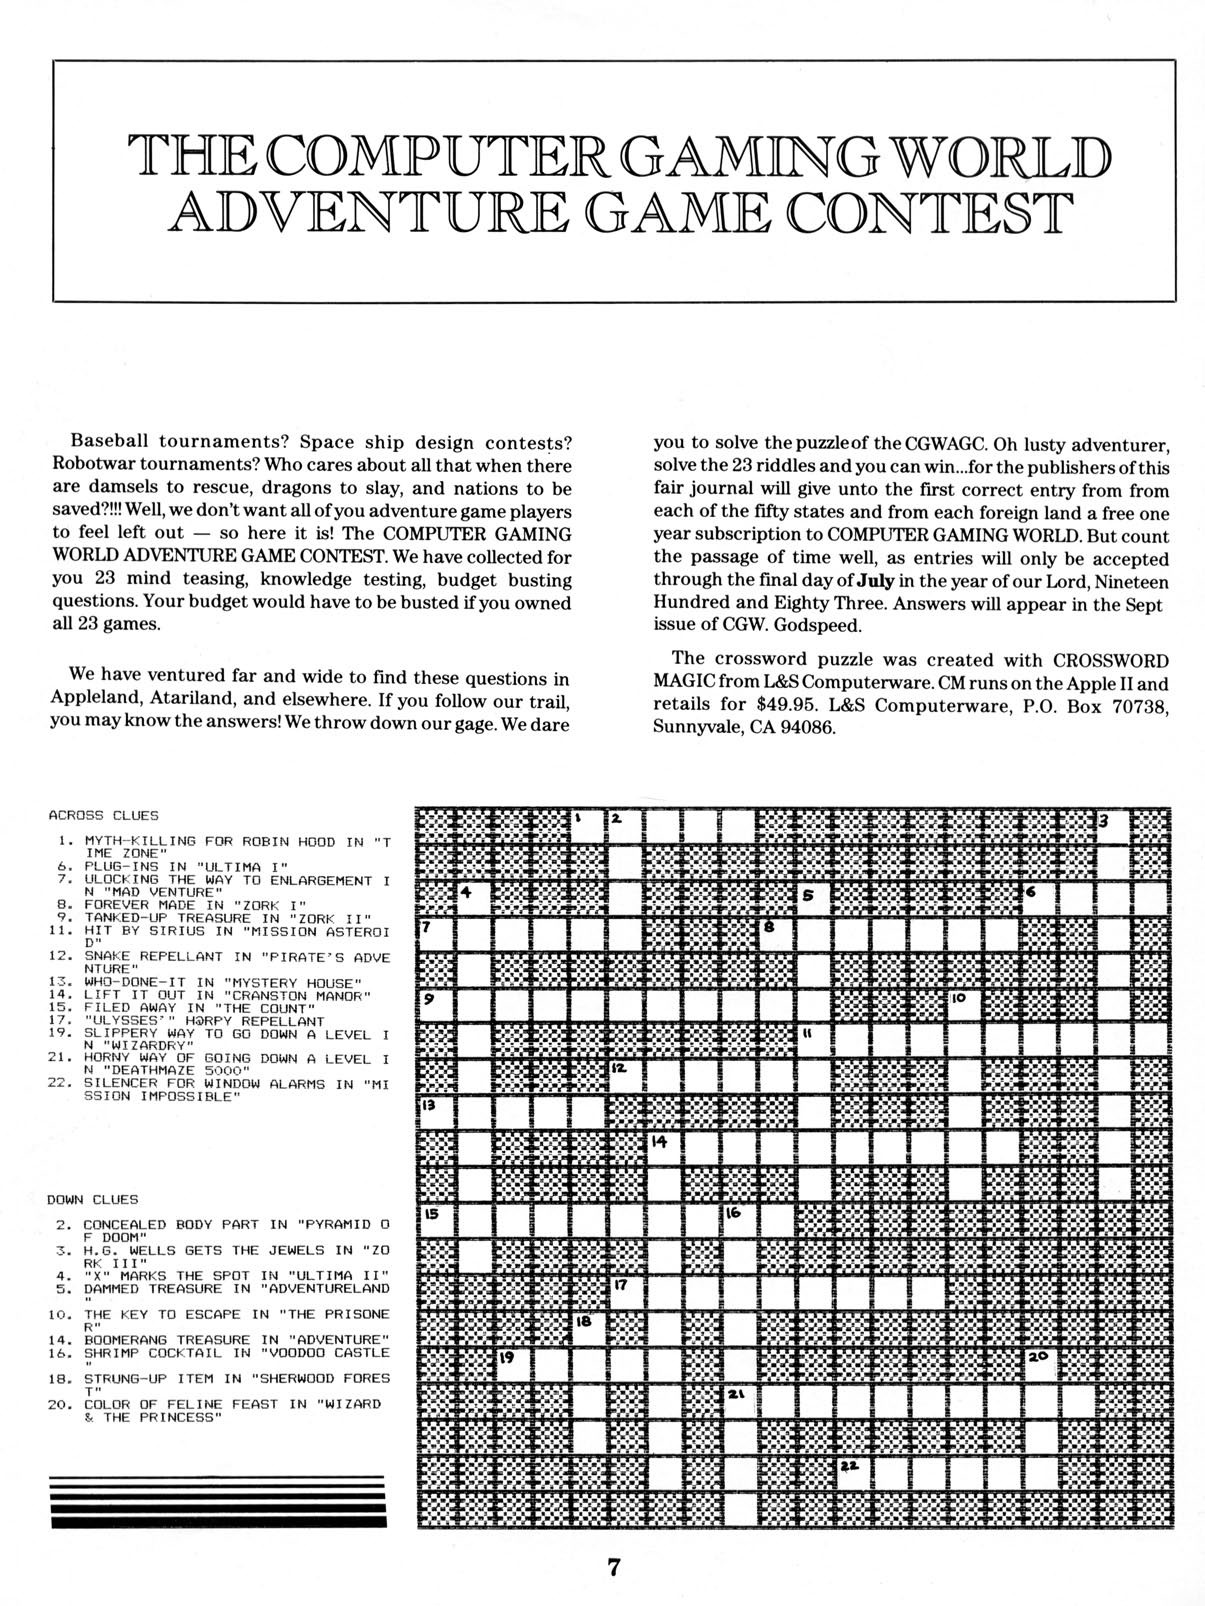 The CGW Adventure Game Contest